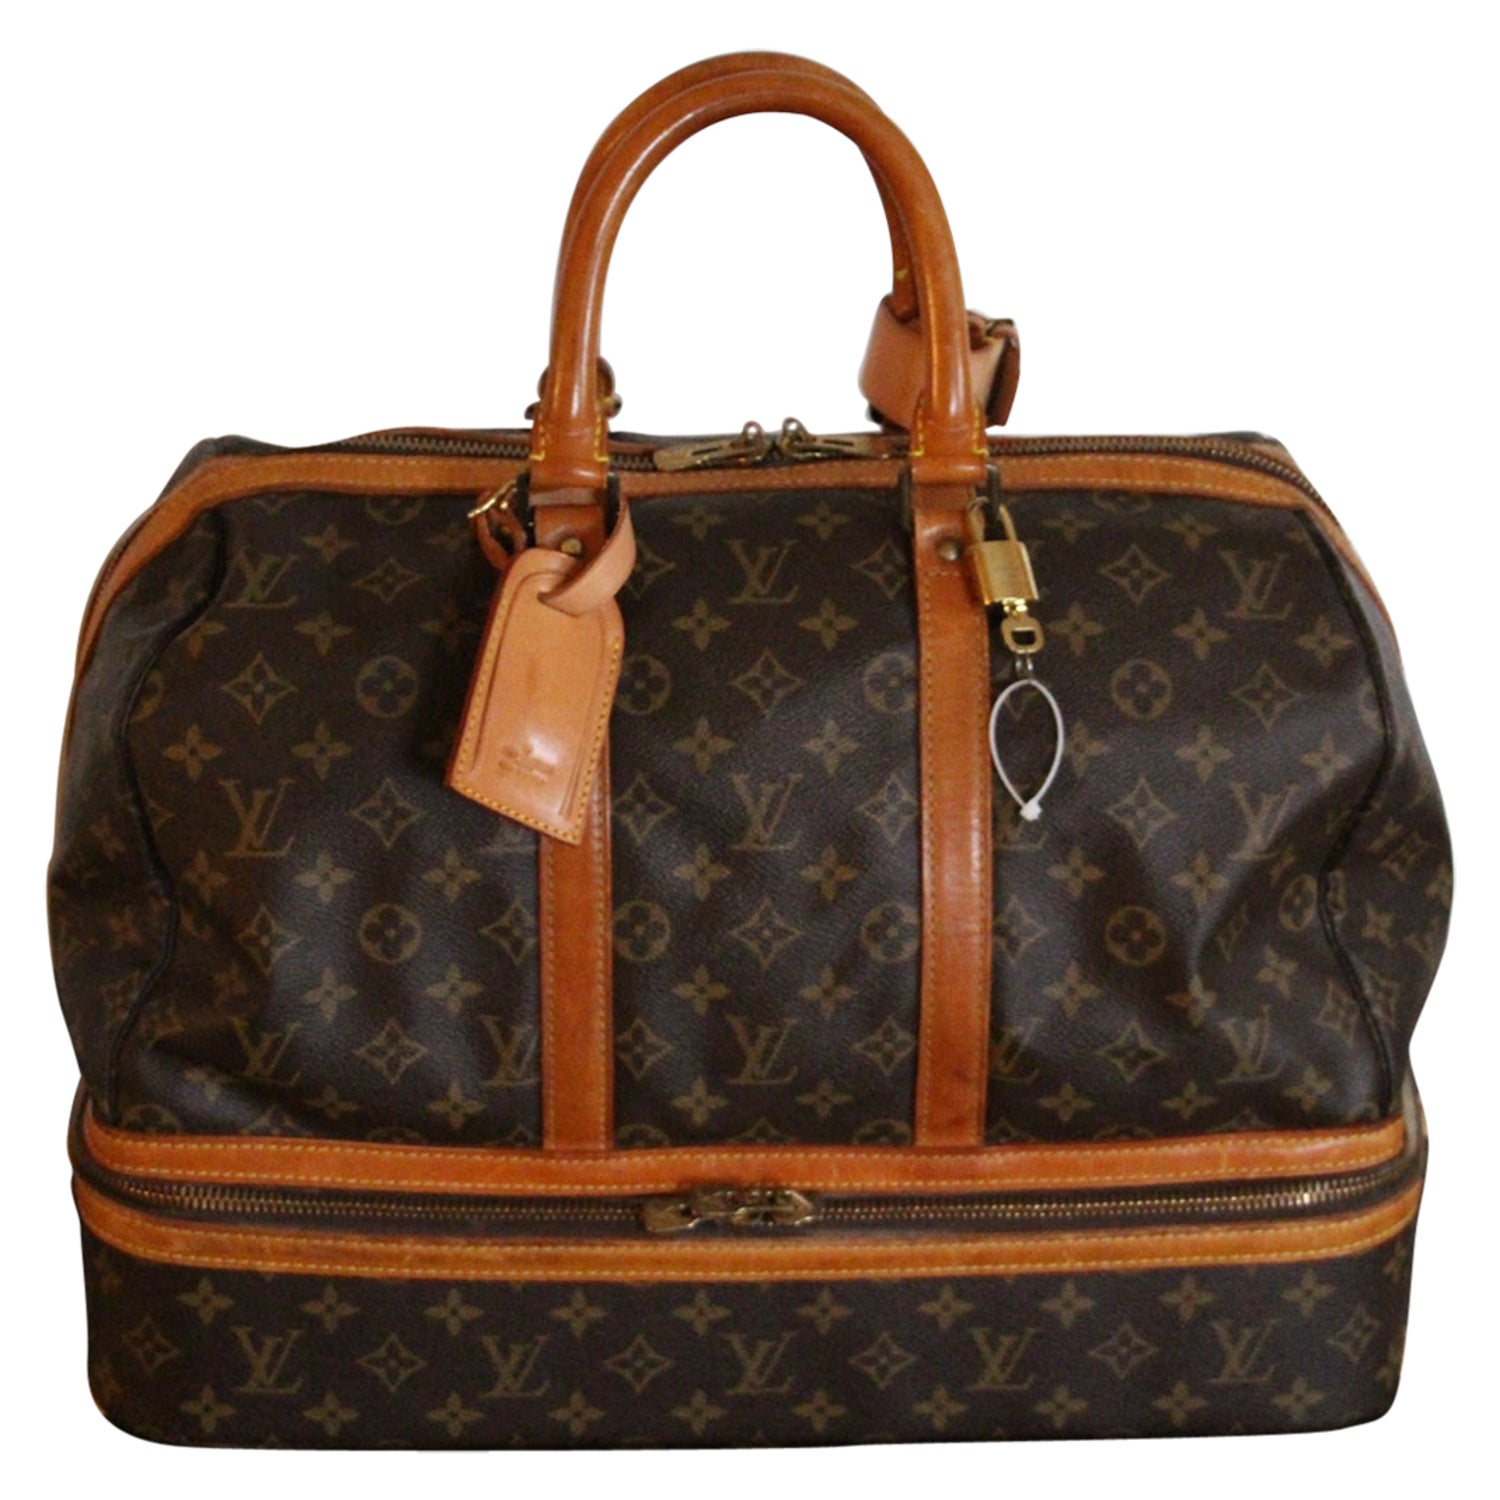 Louis Vuitton Keepall 50B Taurillon Illusion Blue/Green in Leather